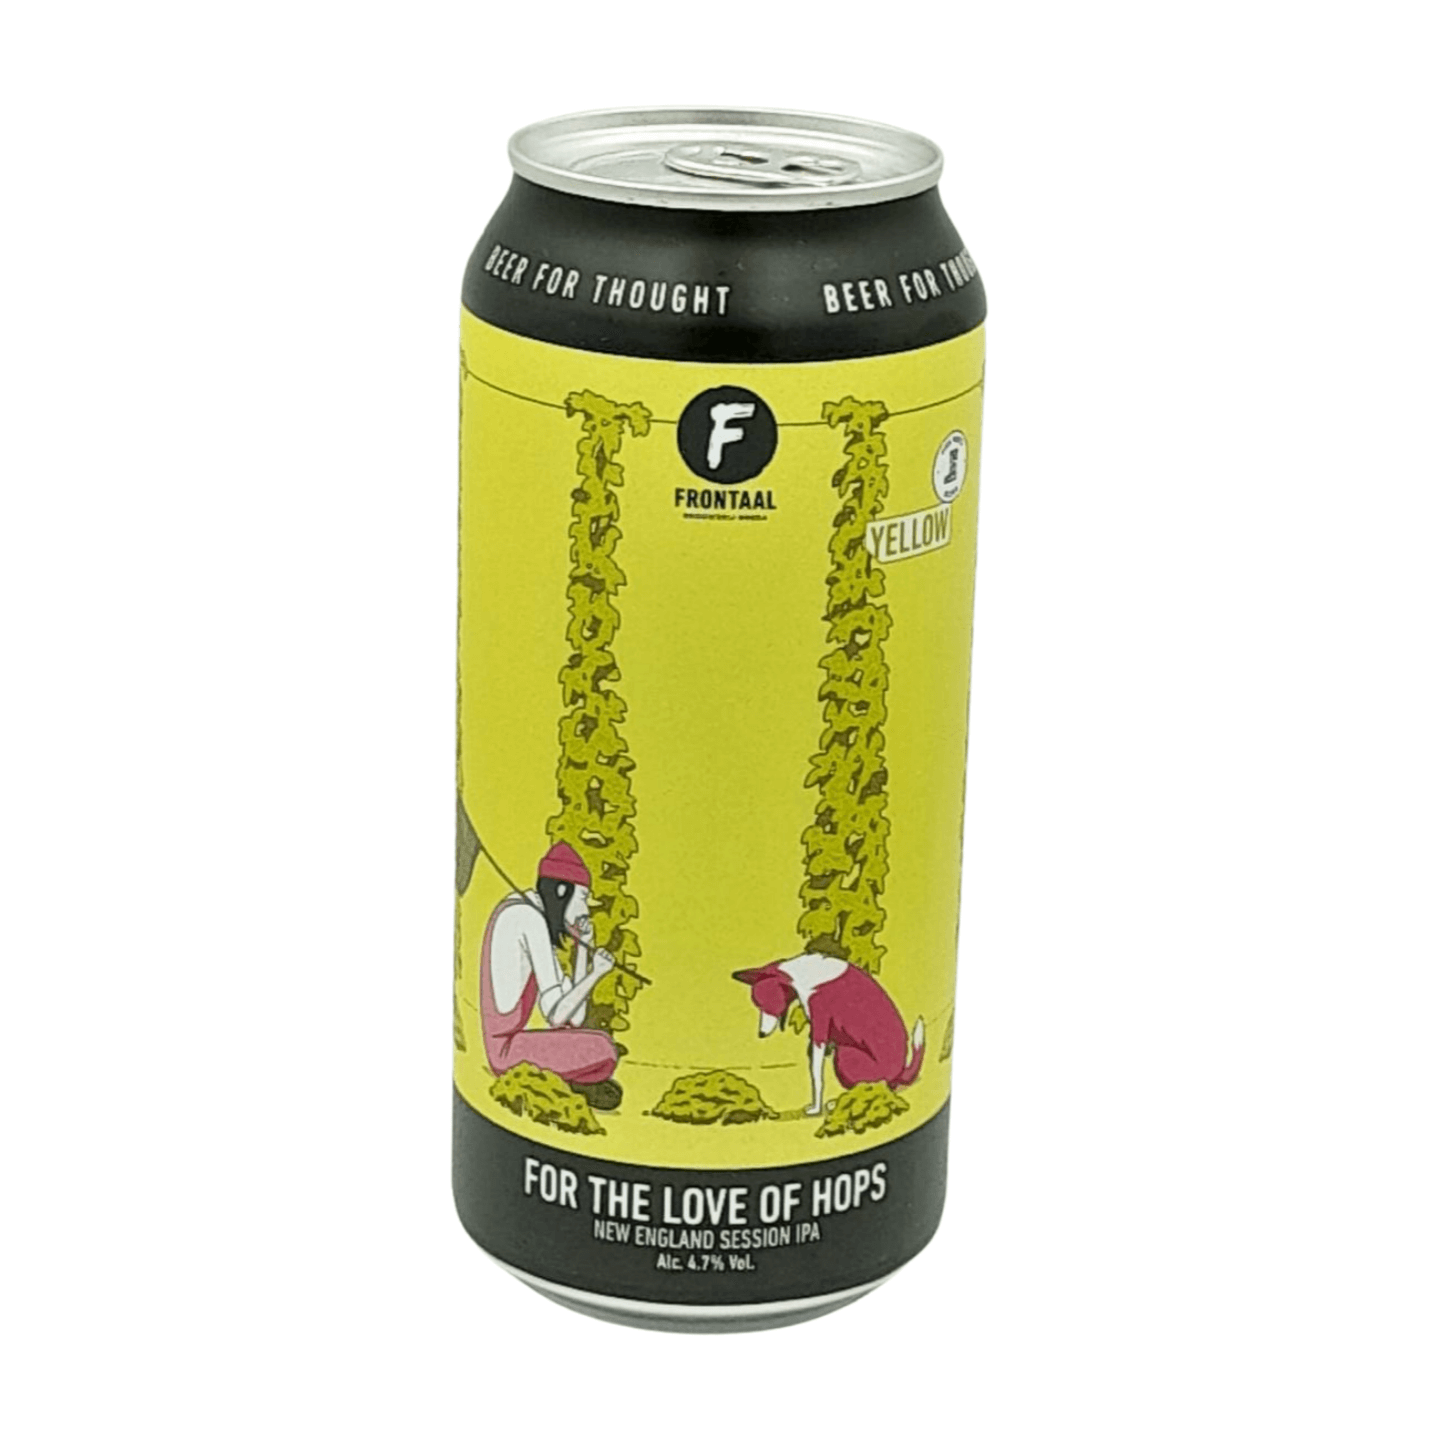 Frontaal Brewing Co. For the Love of Hops 'Yellow' | Session IPA Webshop Online Verdins Bierwinkel Rotterdam